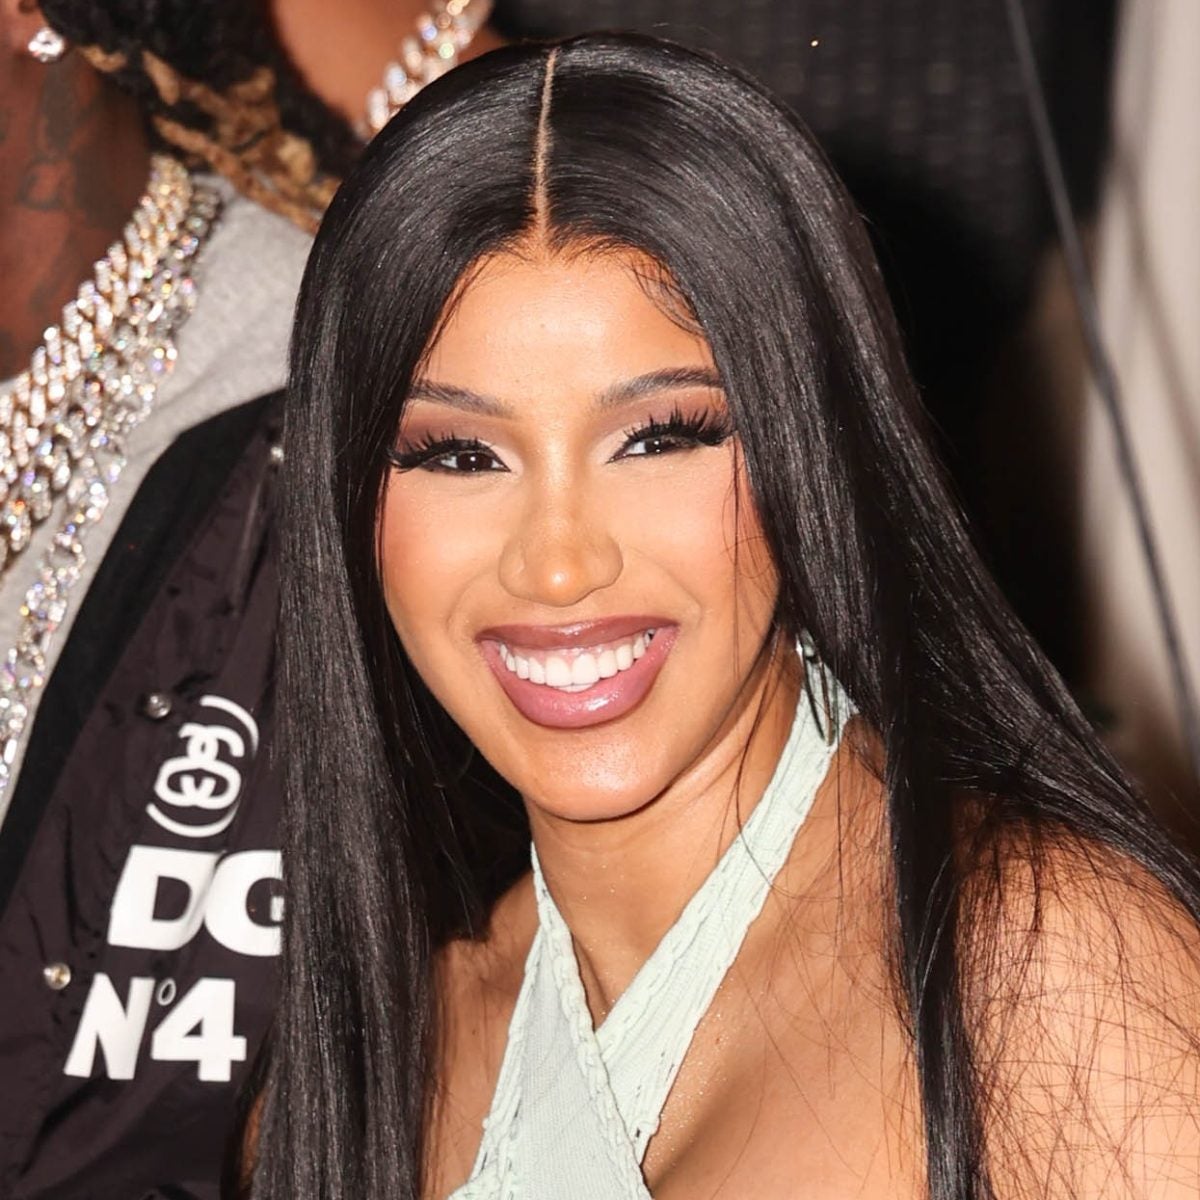 Cardi B Pays Funeral Costs for Bronx Fire Victims And Defends Lauren Smith-Fields